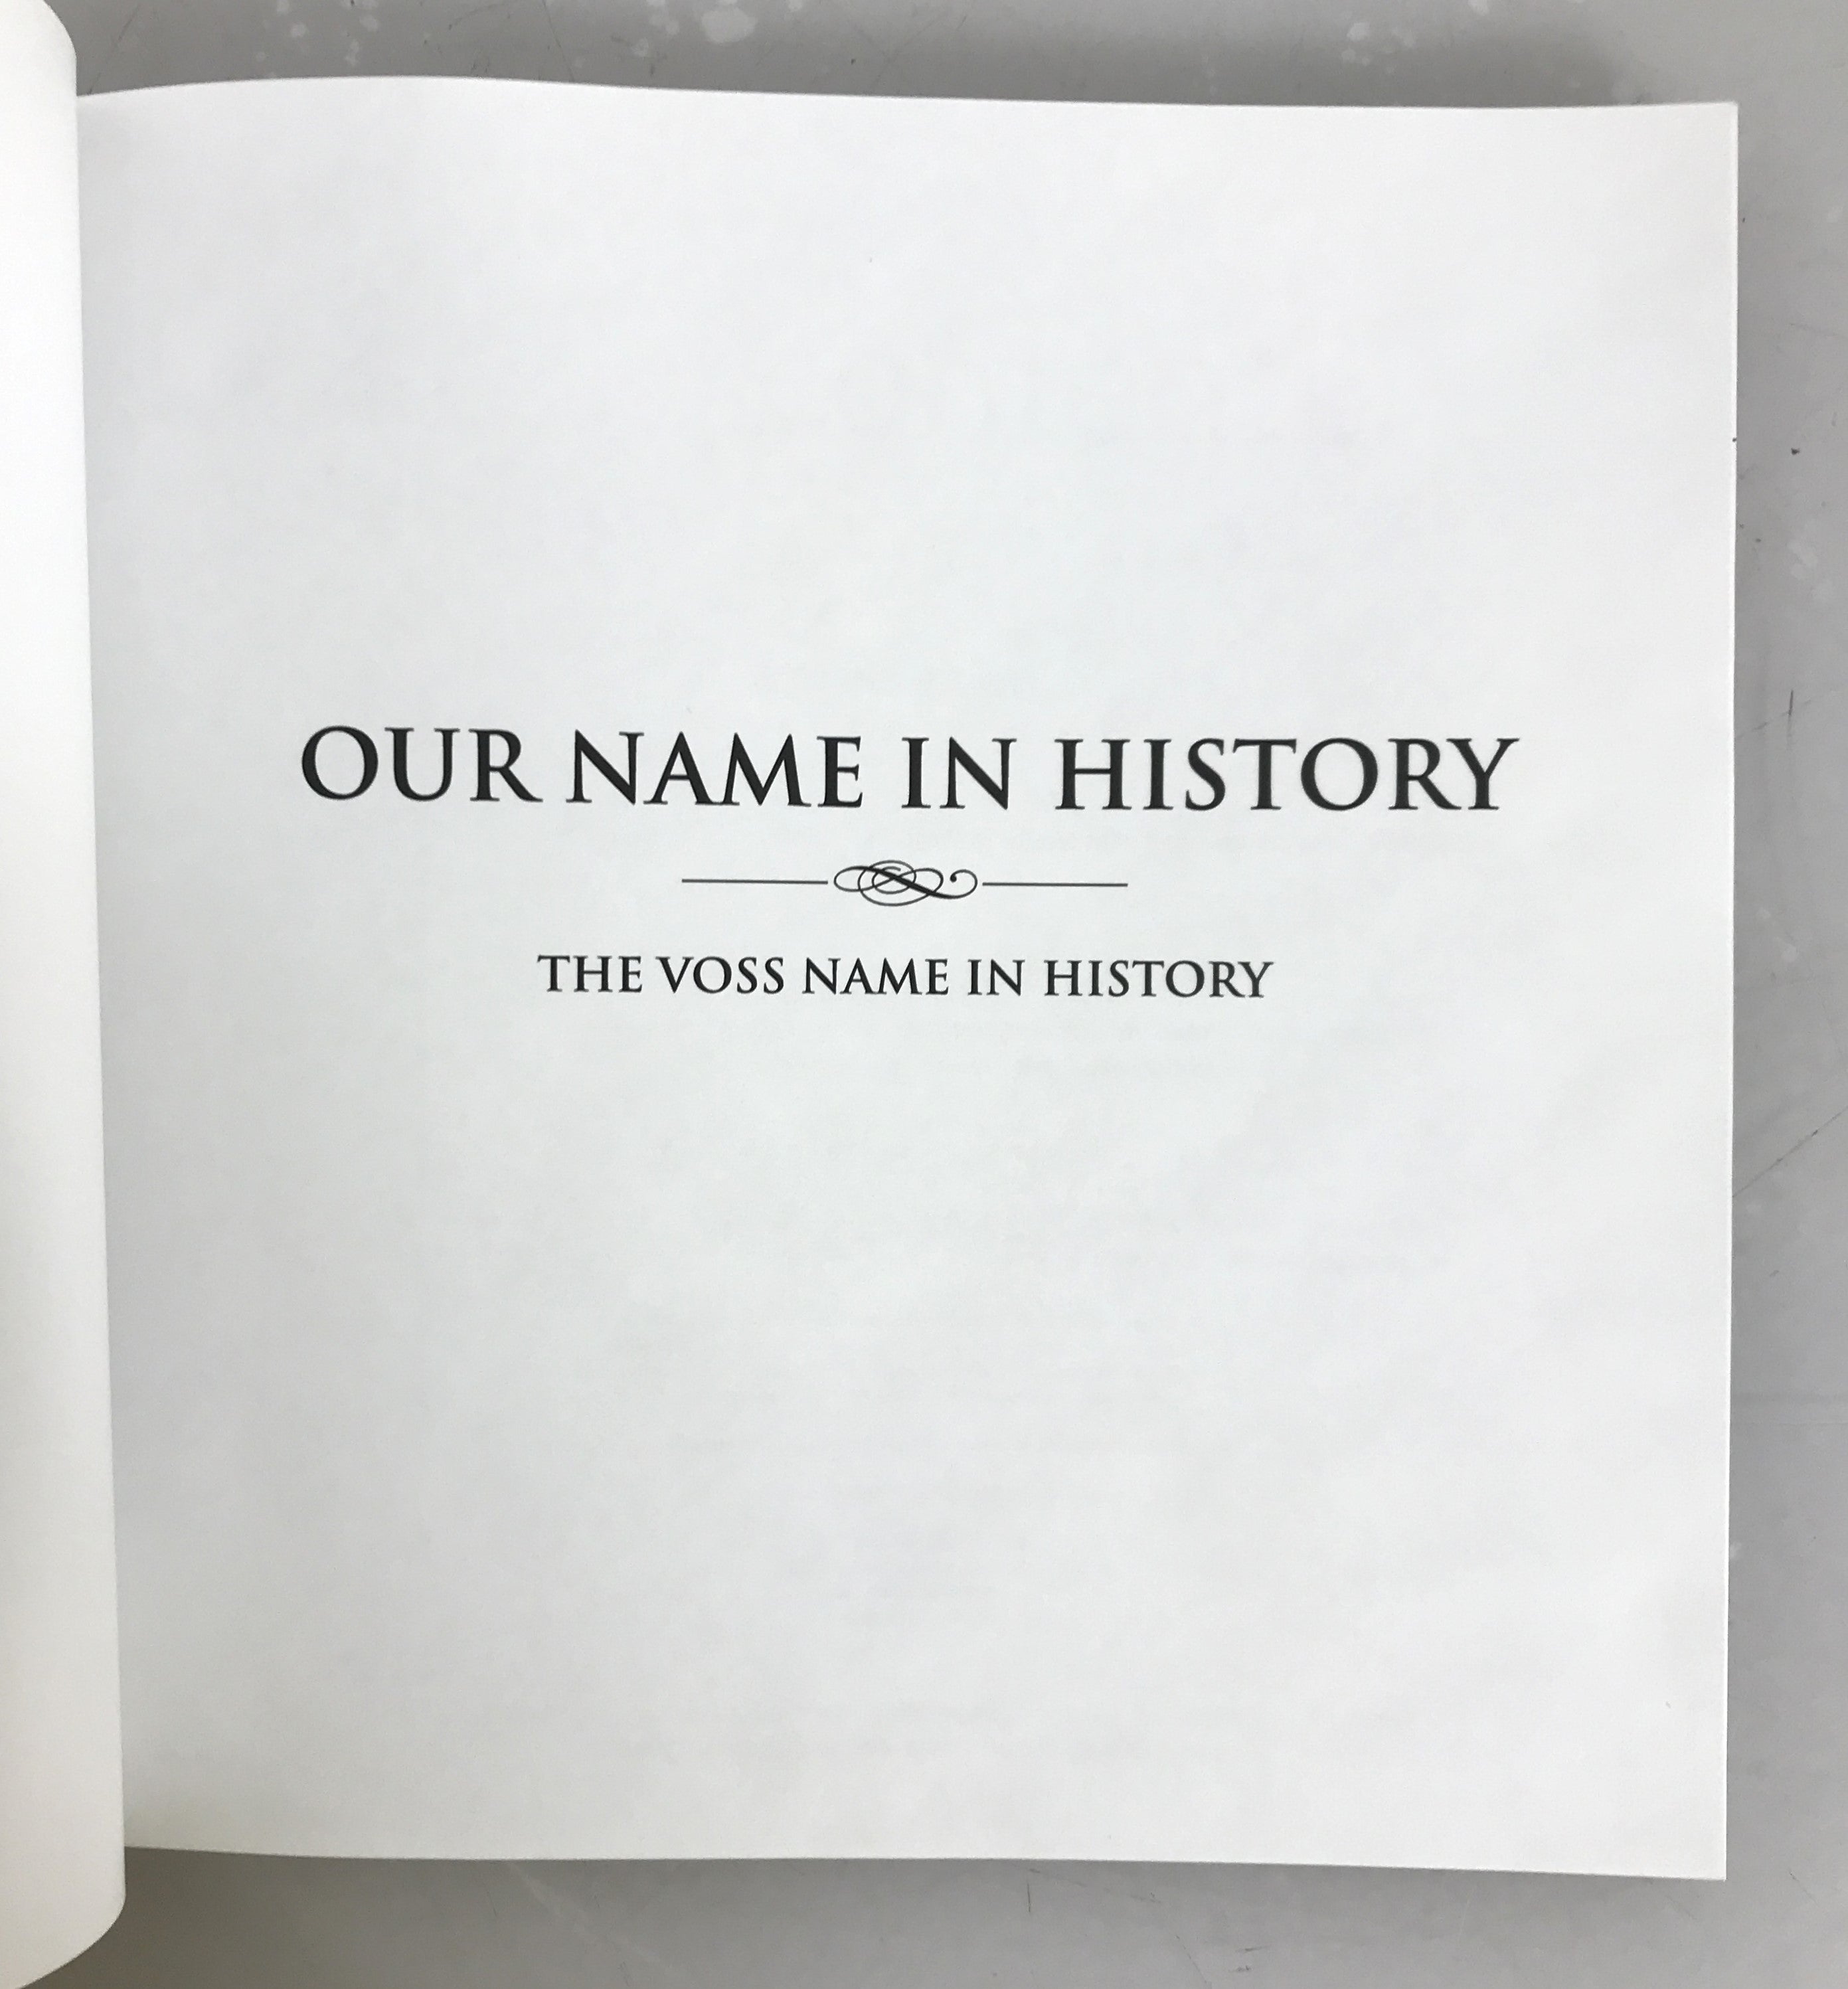 The Voss Name in History by Ancestry.com "Our Name in History" SC